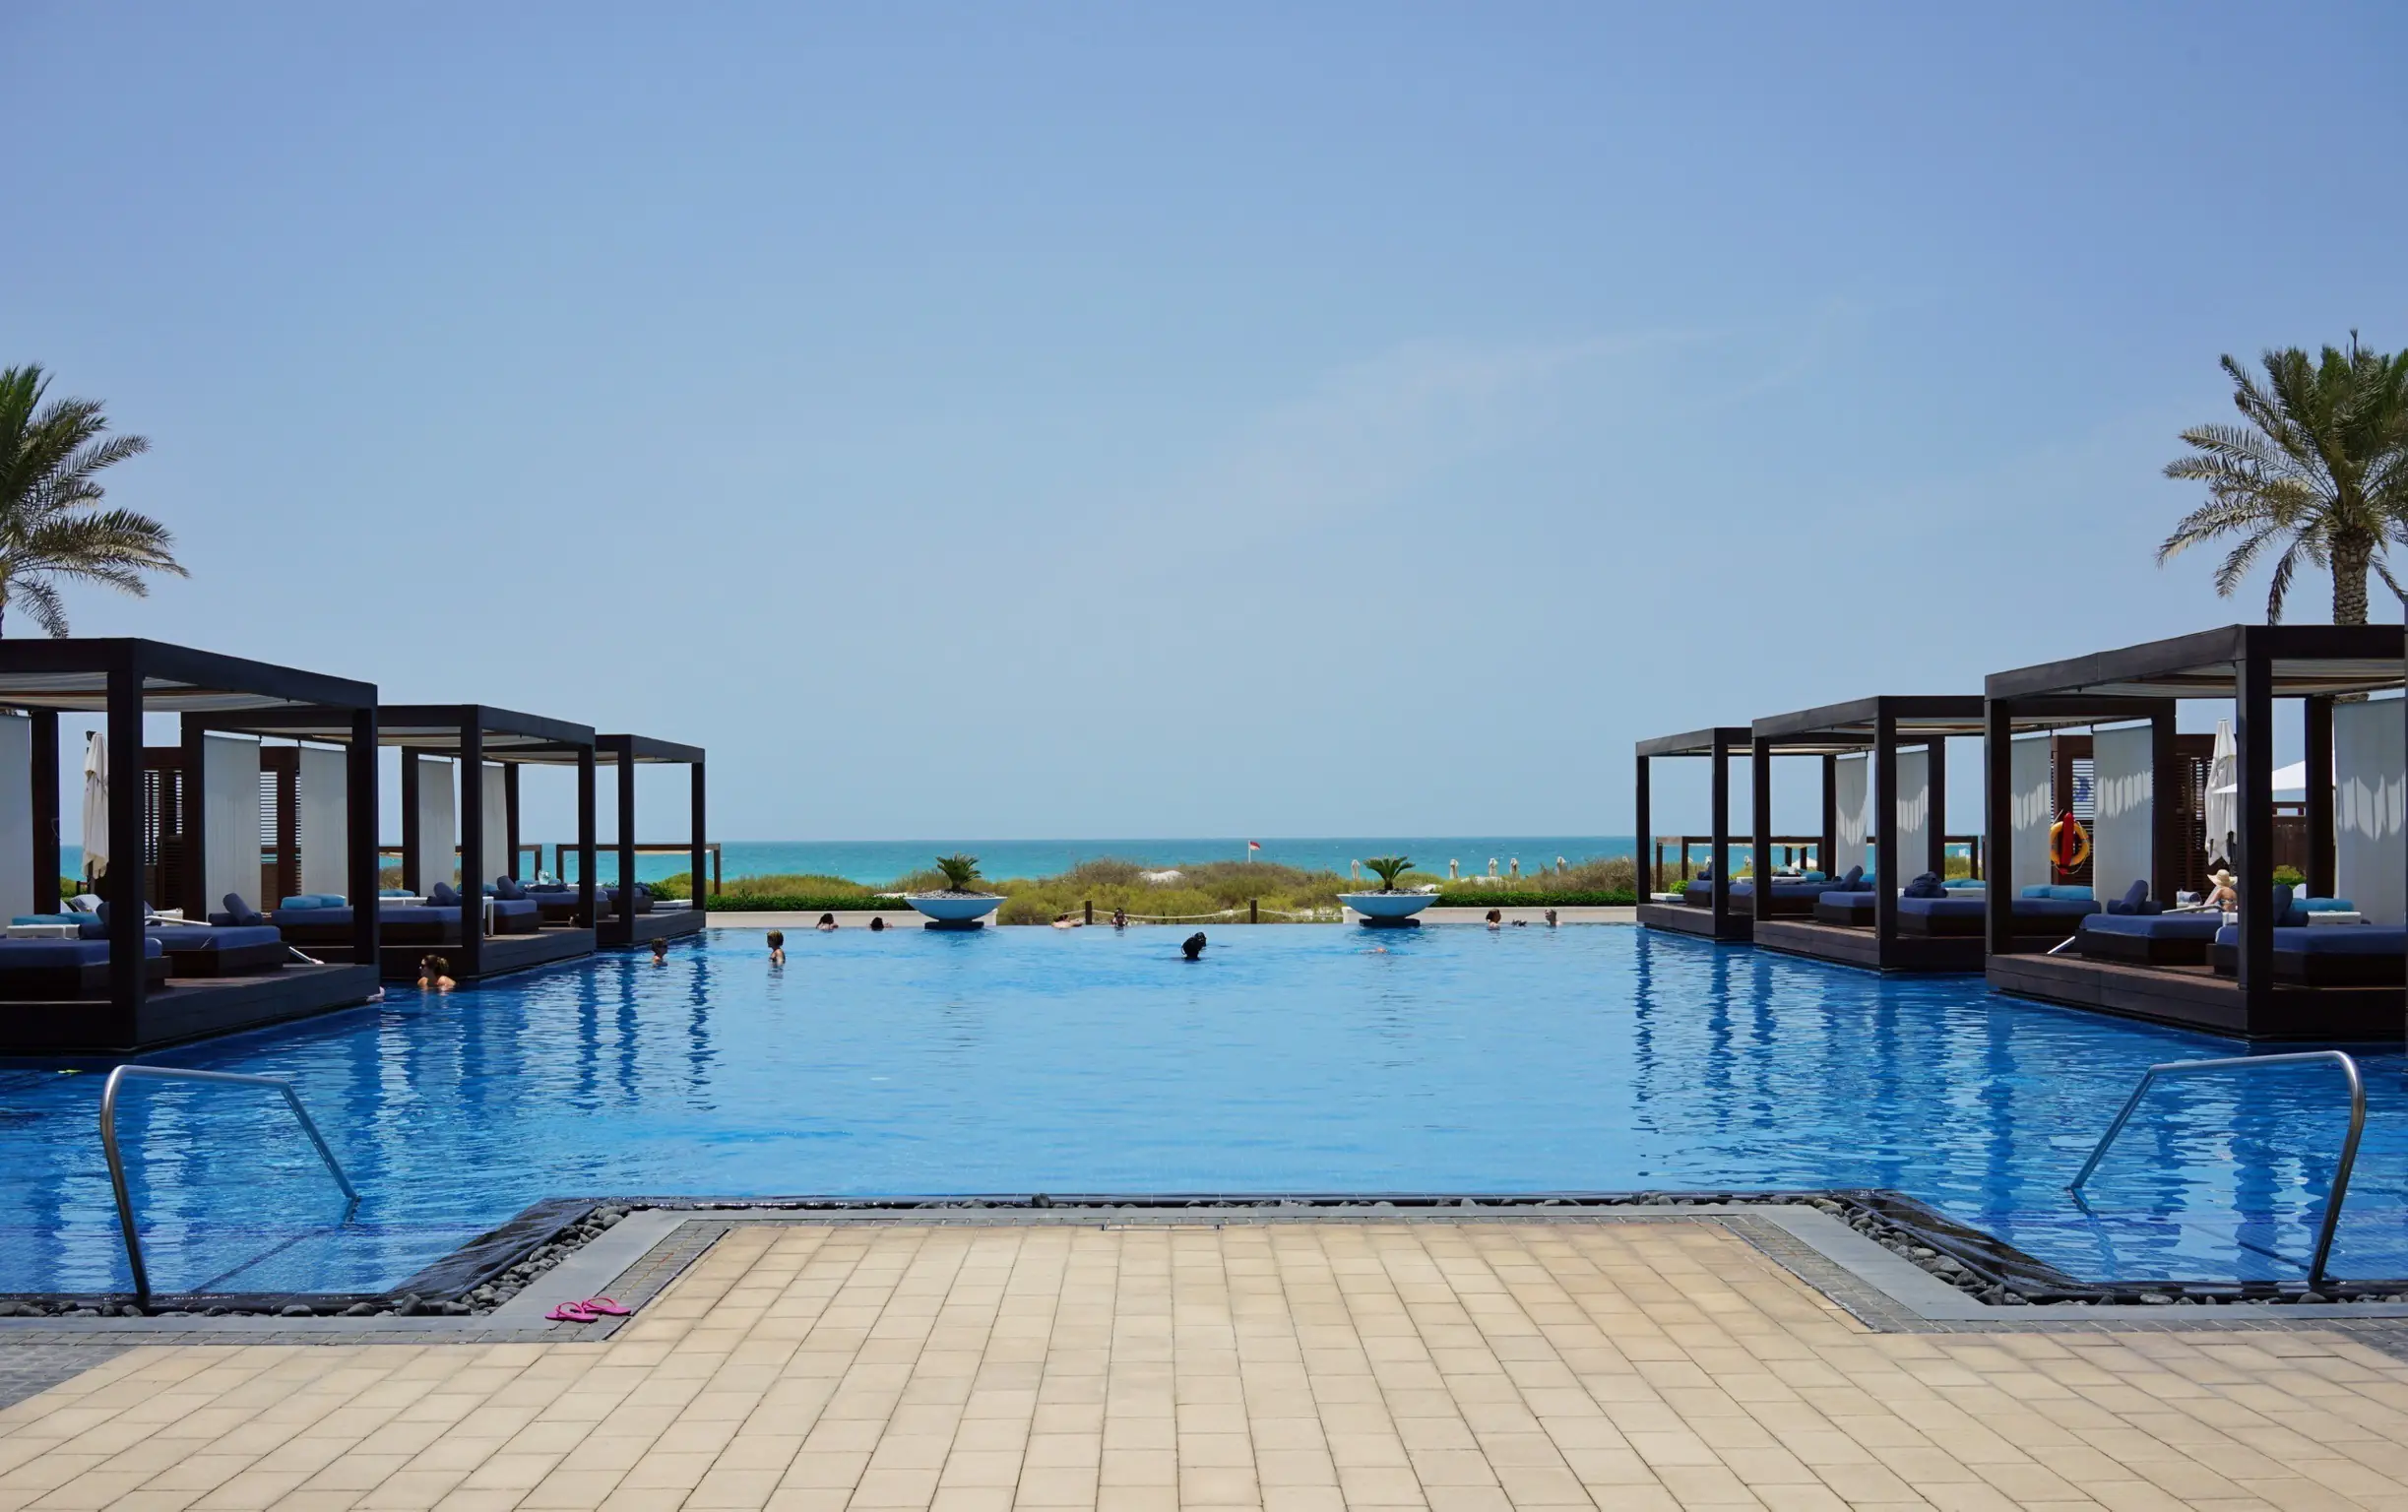 Abu Dhabi and Dubai Reopen Swimming Destinations - Coming Soon in UAE